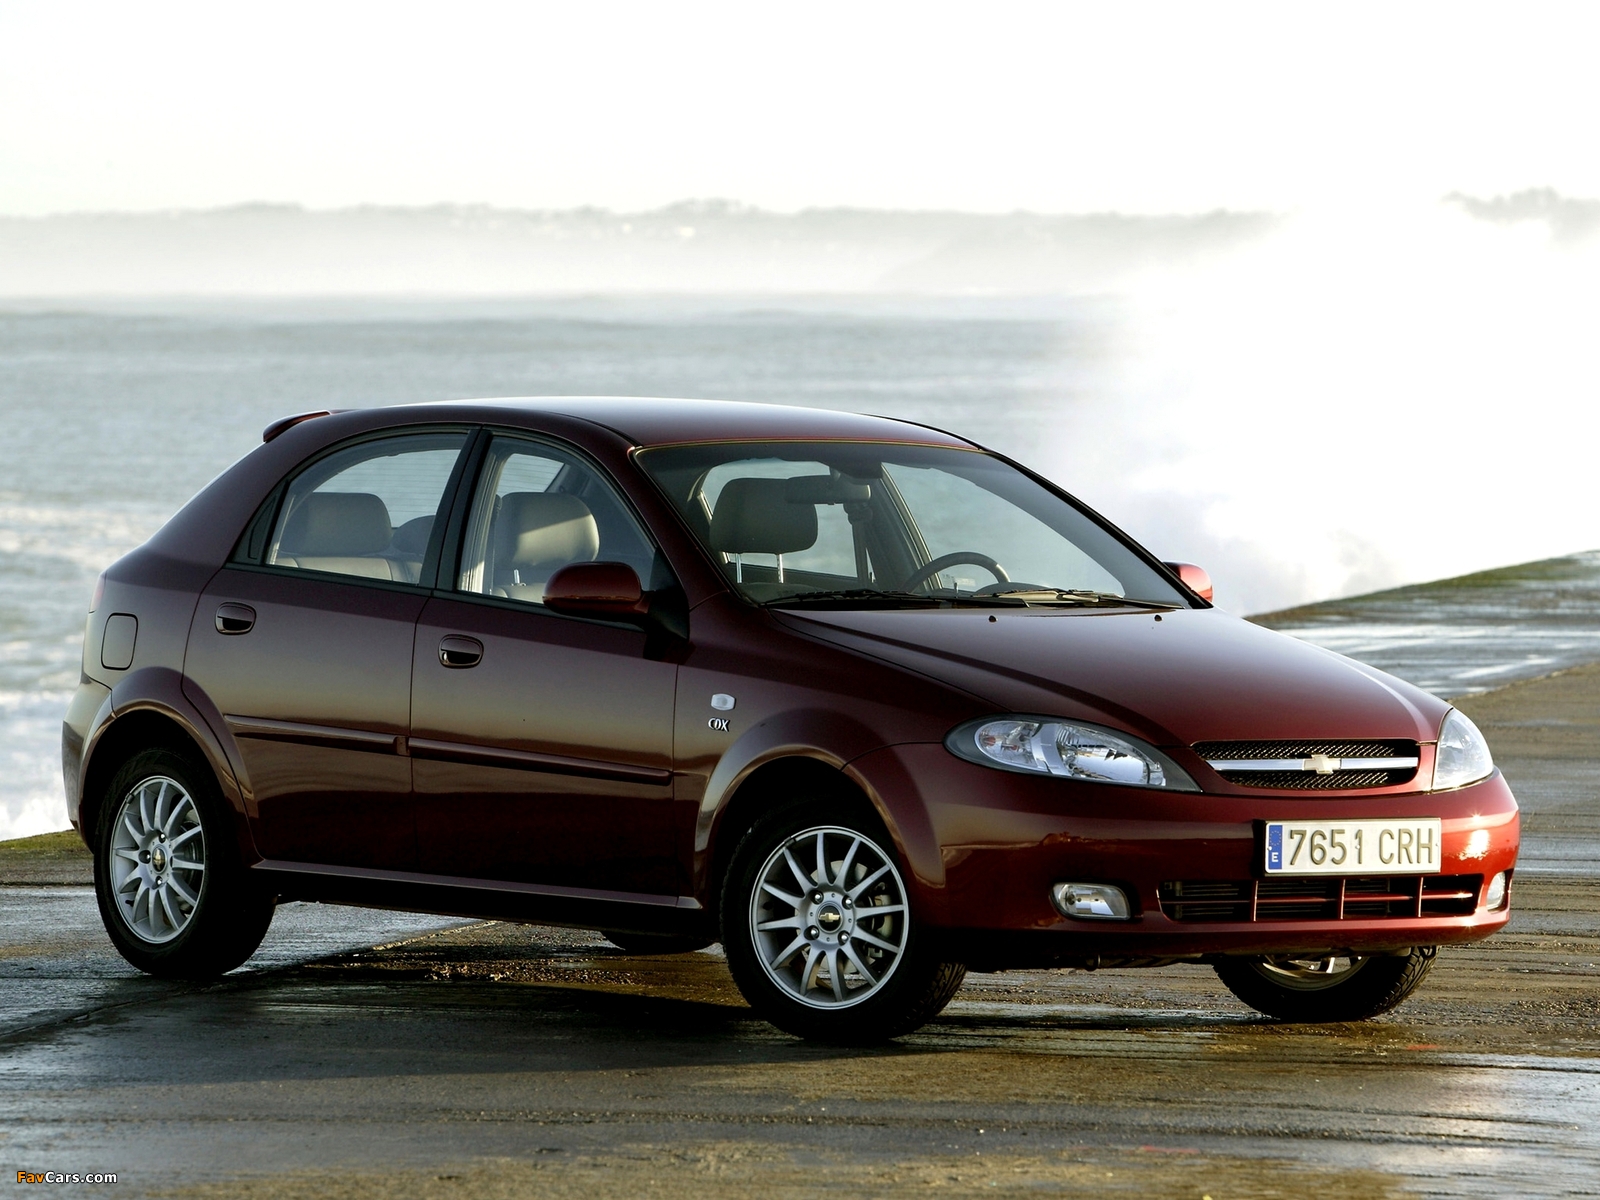 Chevrolet Lacetti Hatchback 2004 pictures (1600 x 1200)